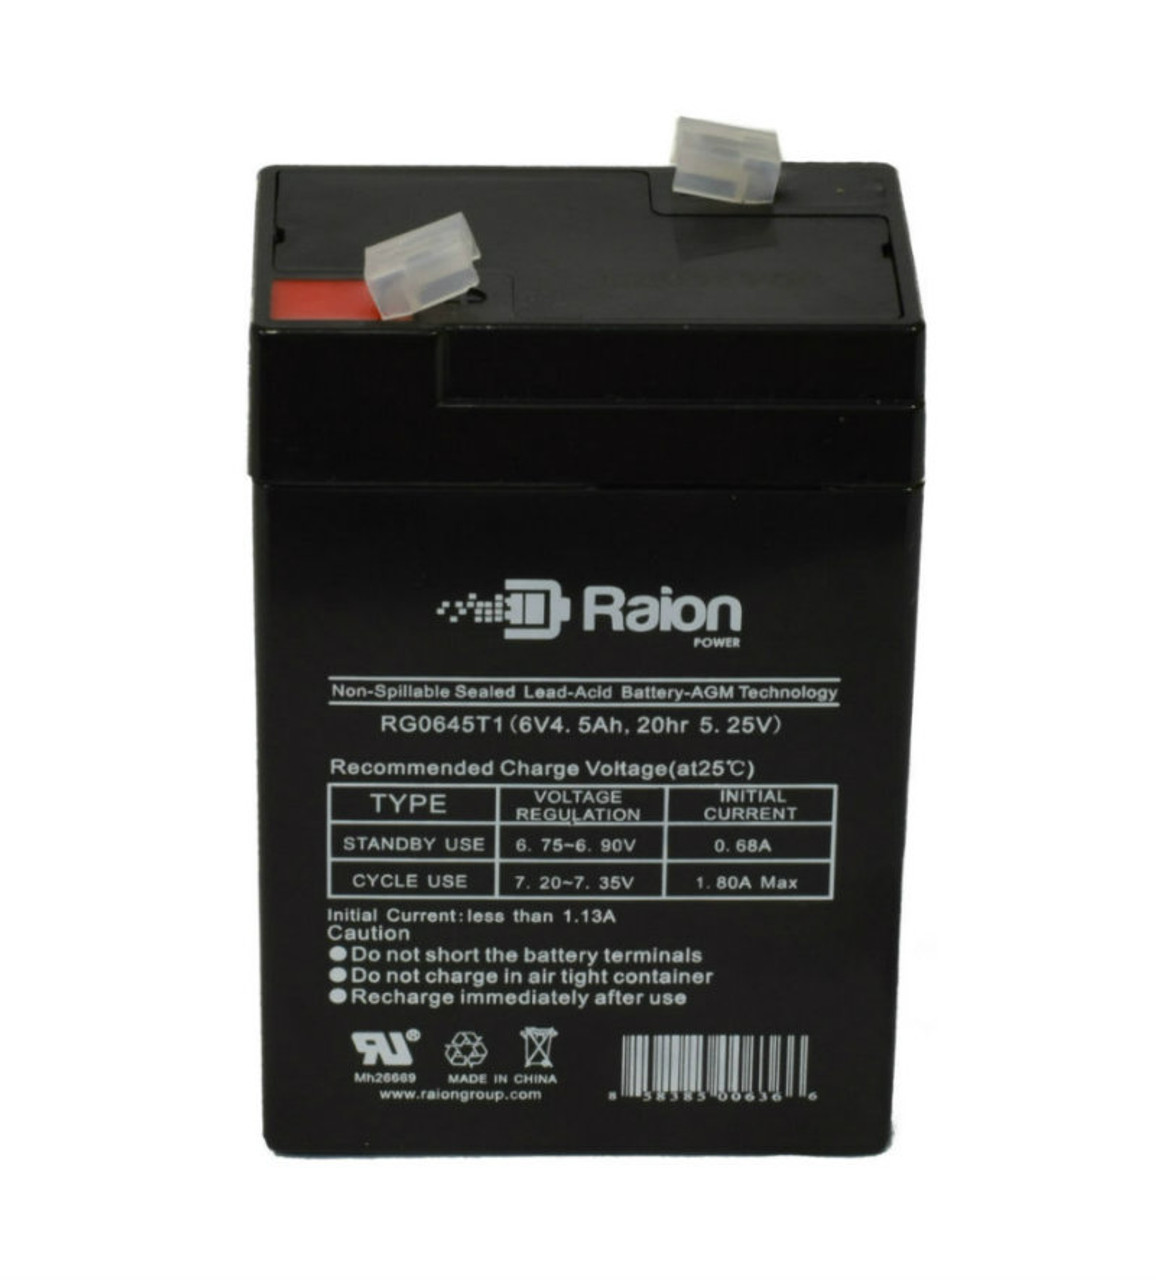 Raion Power RG0645T1 Replacement Battery Cartridge for Criticare Systems Pulse Oximeter 50245